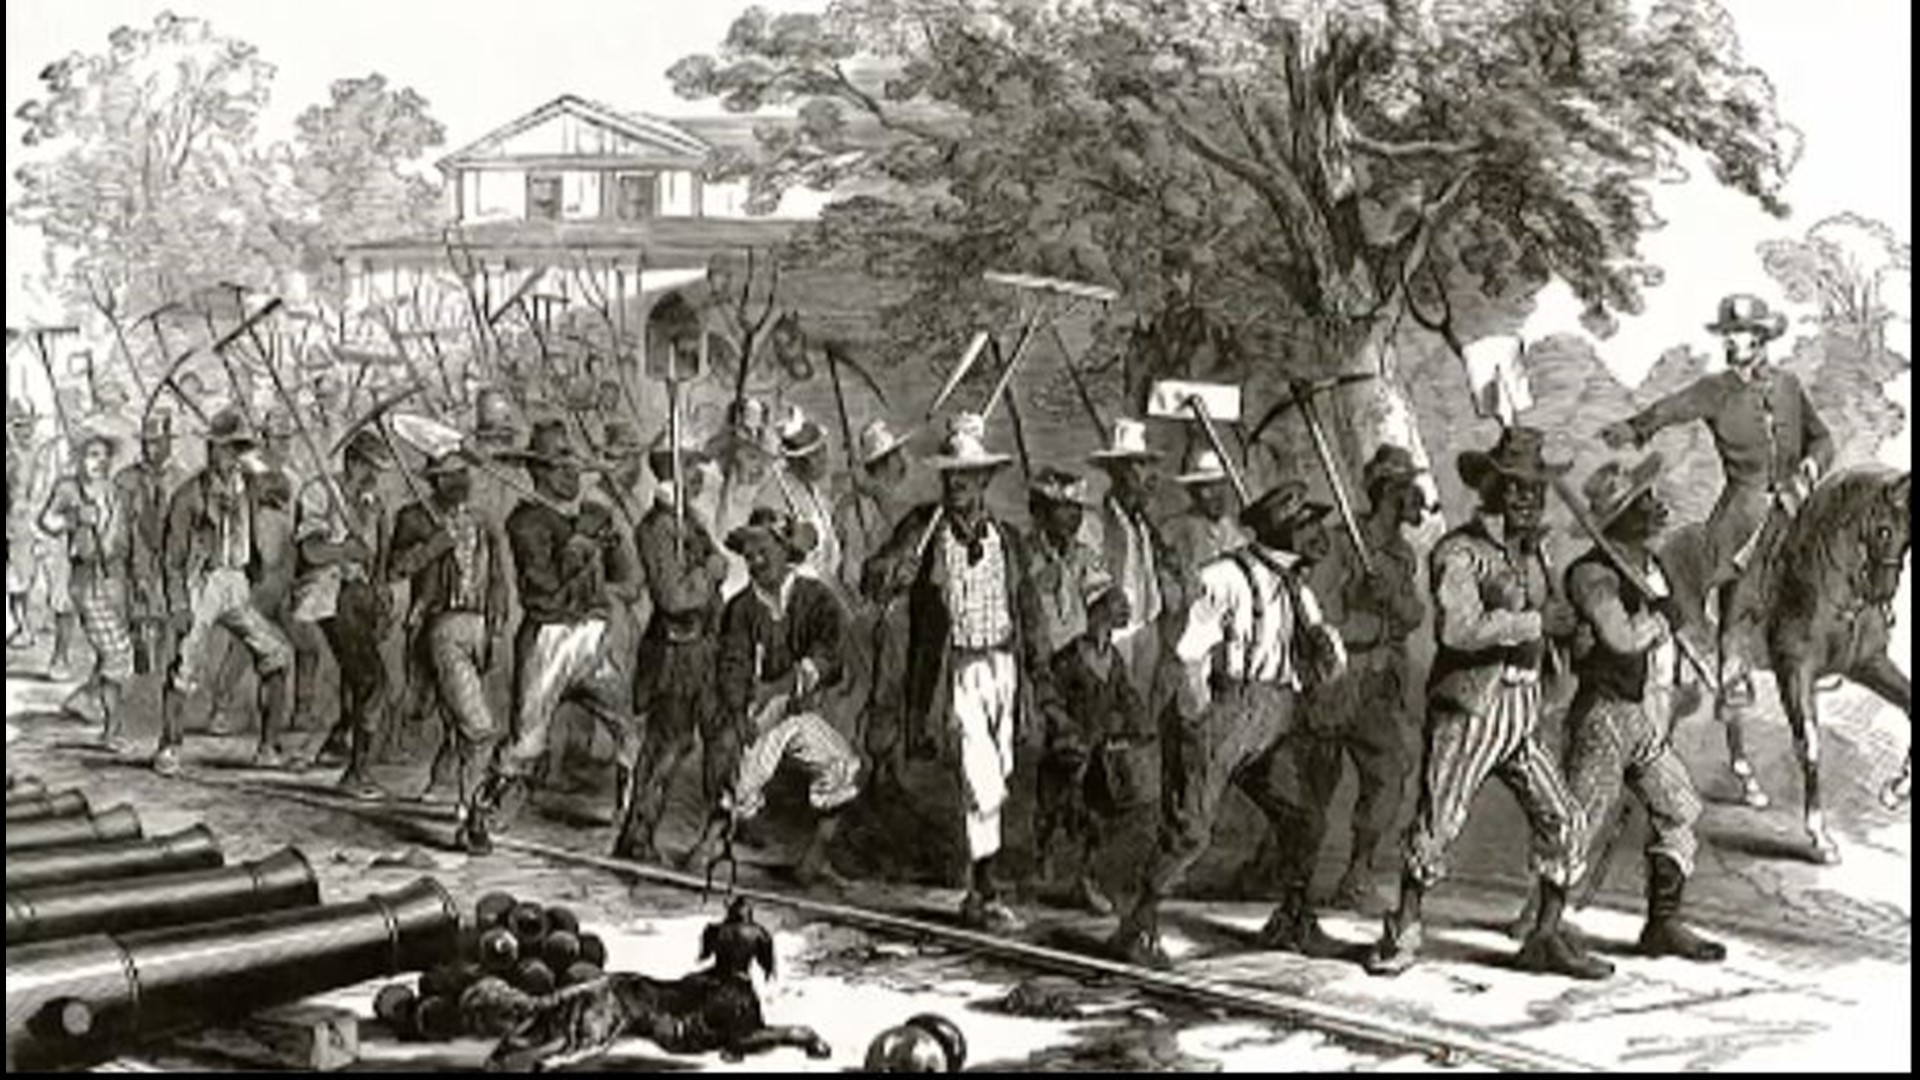 We look into the history of Juneteenth and what really happened in Texas.